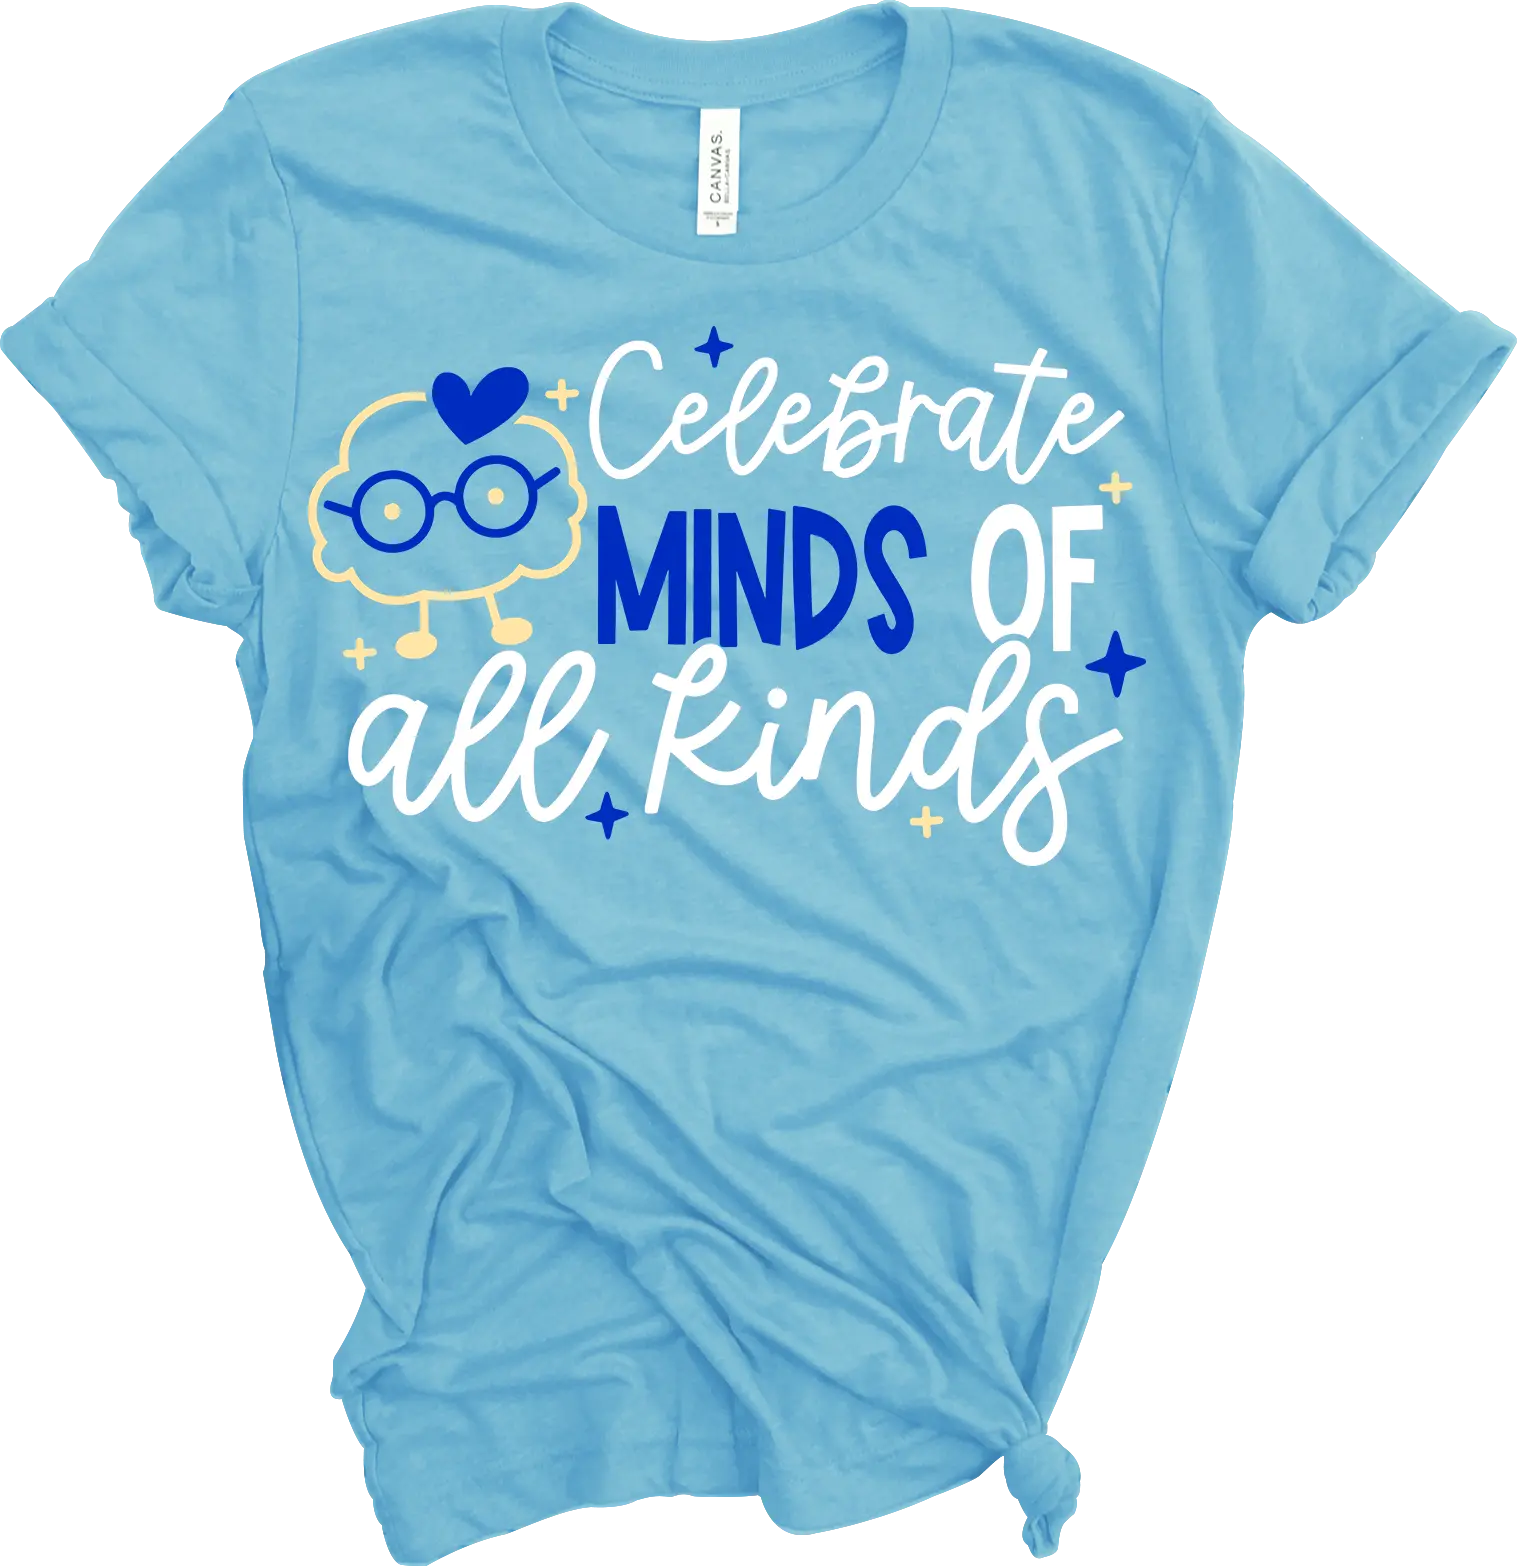 "Celebrate Minds of All Kinds" Exclusive Tee